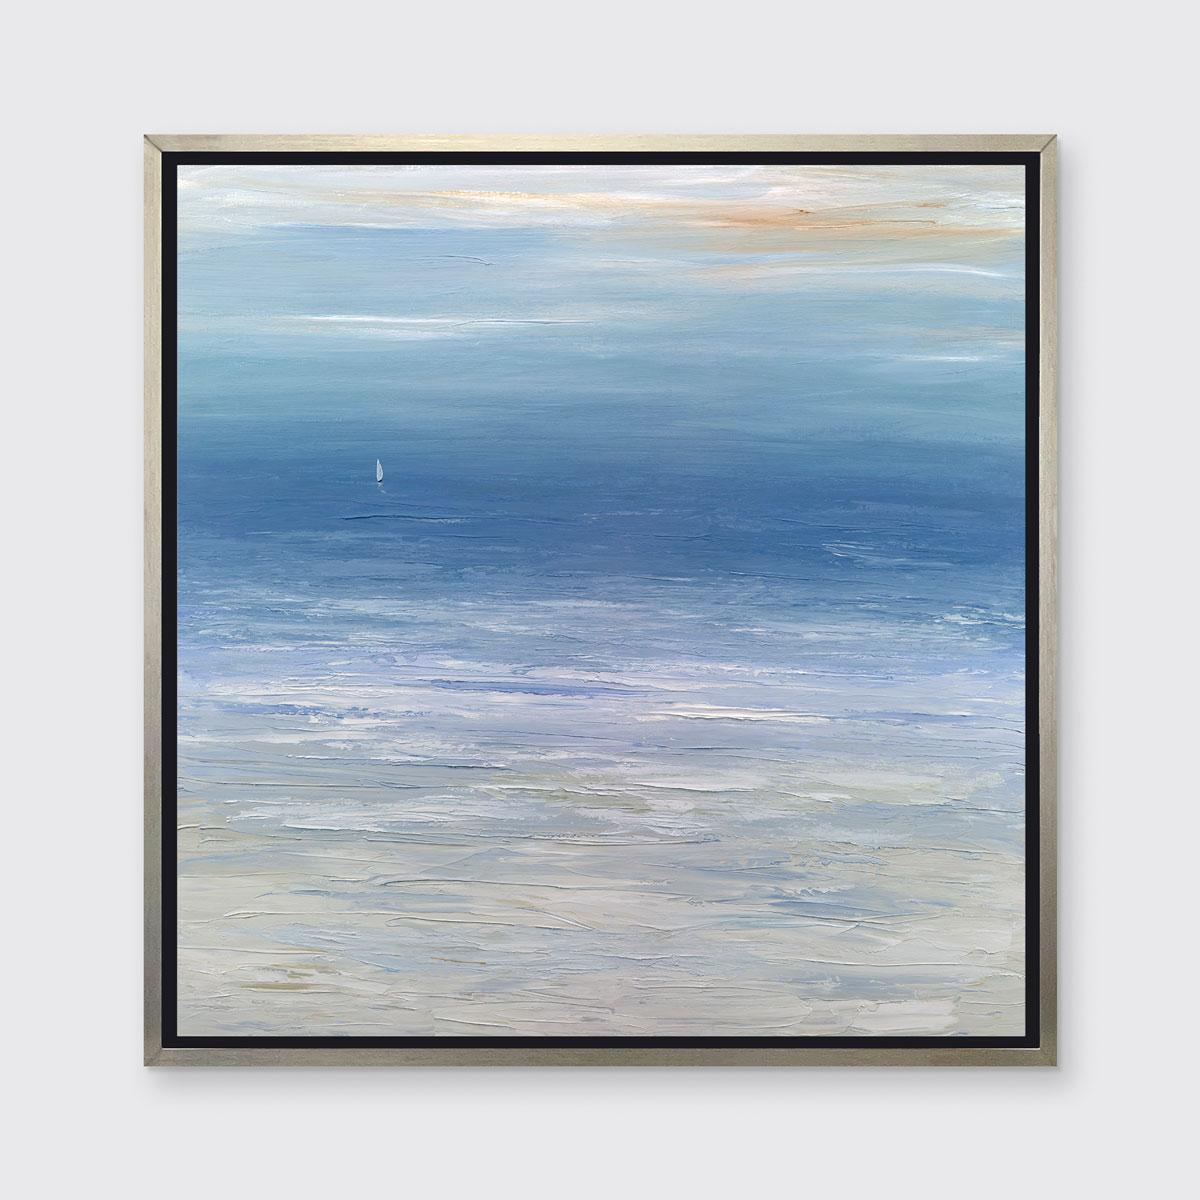 S. Cora Aldo Landscape Print - "Calm Waters II, " Framed Limited Edition Giclee Print, 48" x 48"